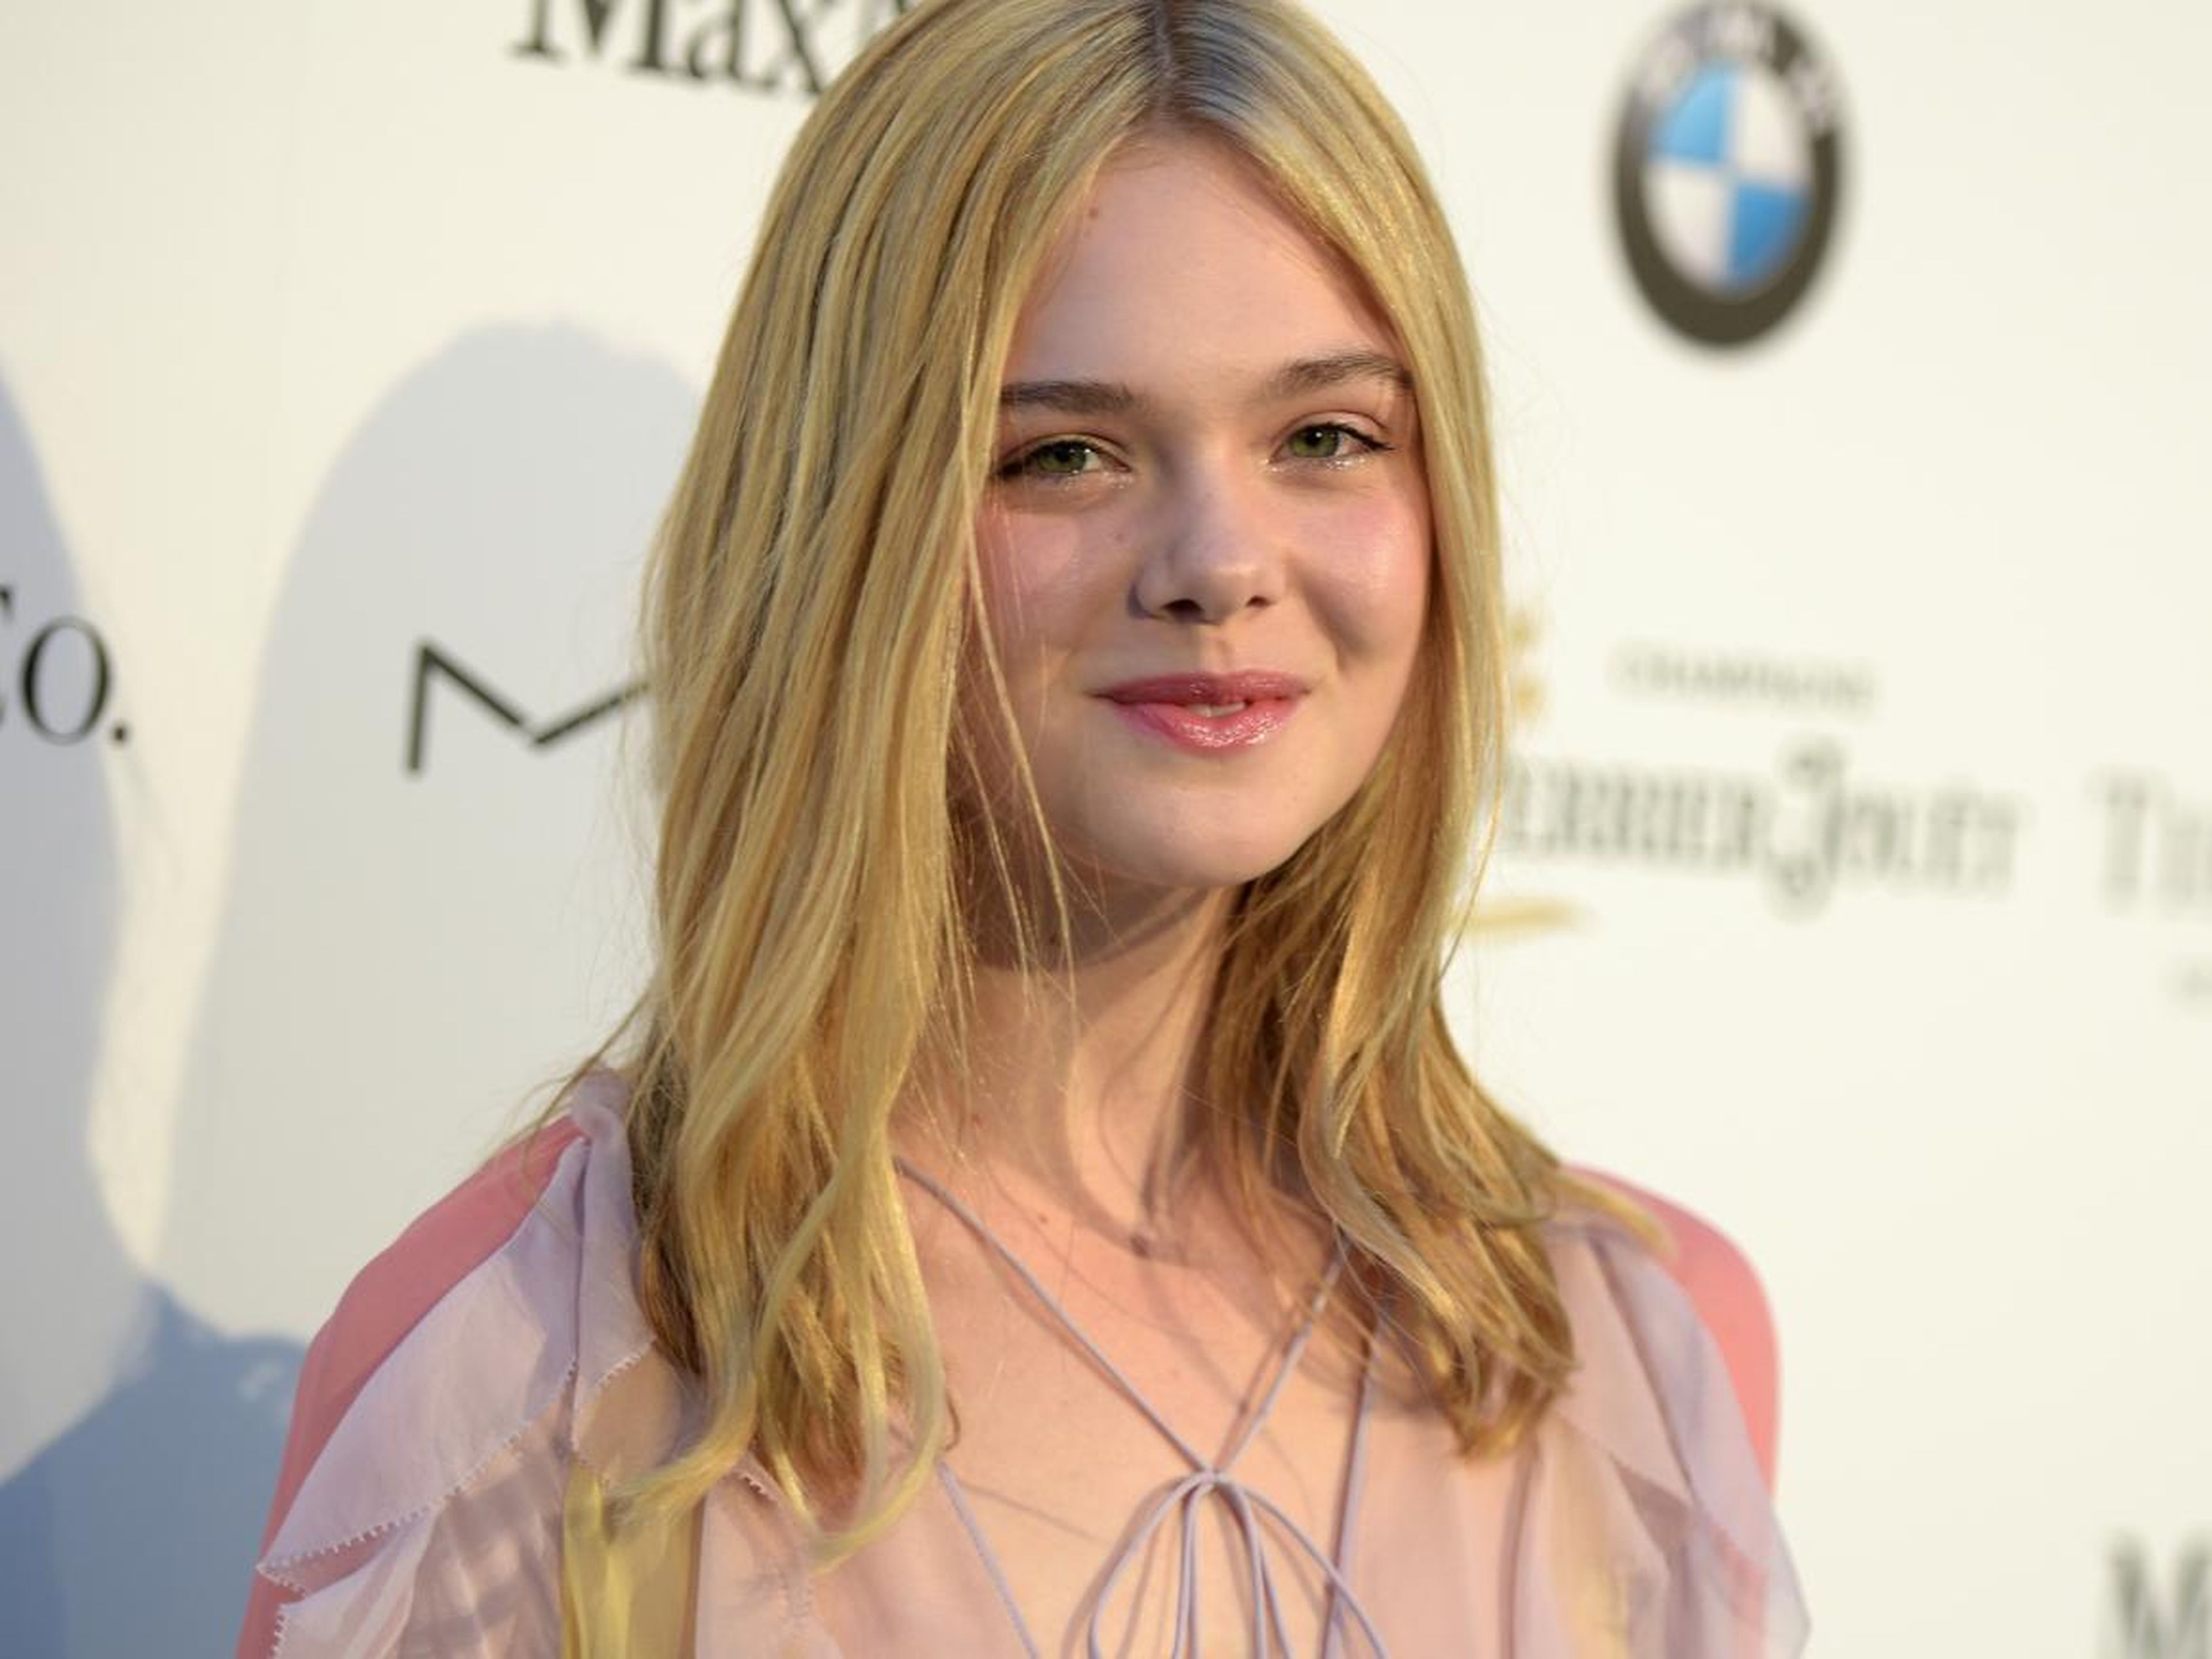 Like many child stars, actress Elle Fanning had to forgo a traditional education to free up time for her career.